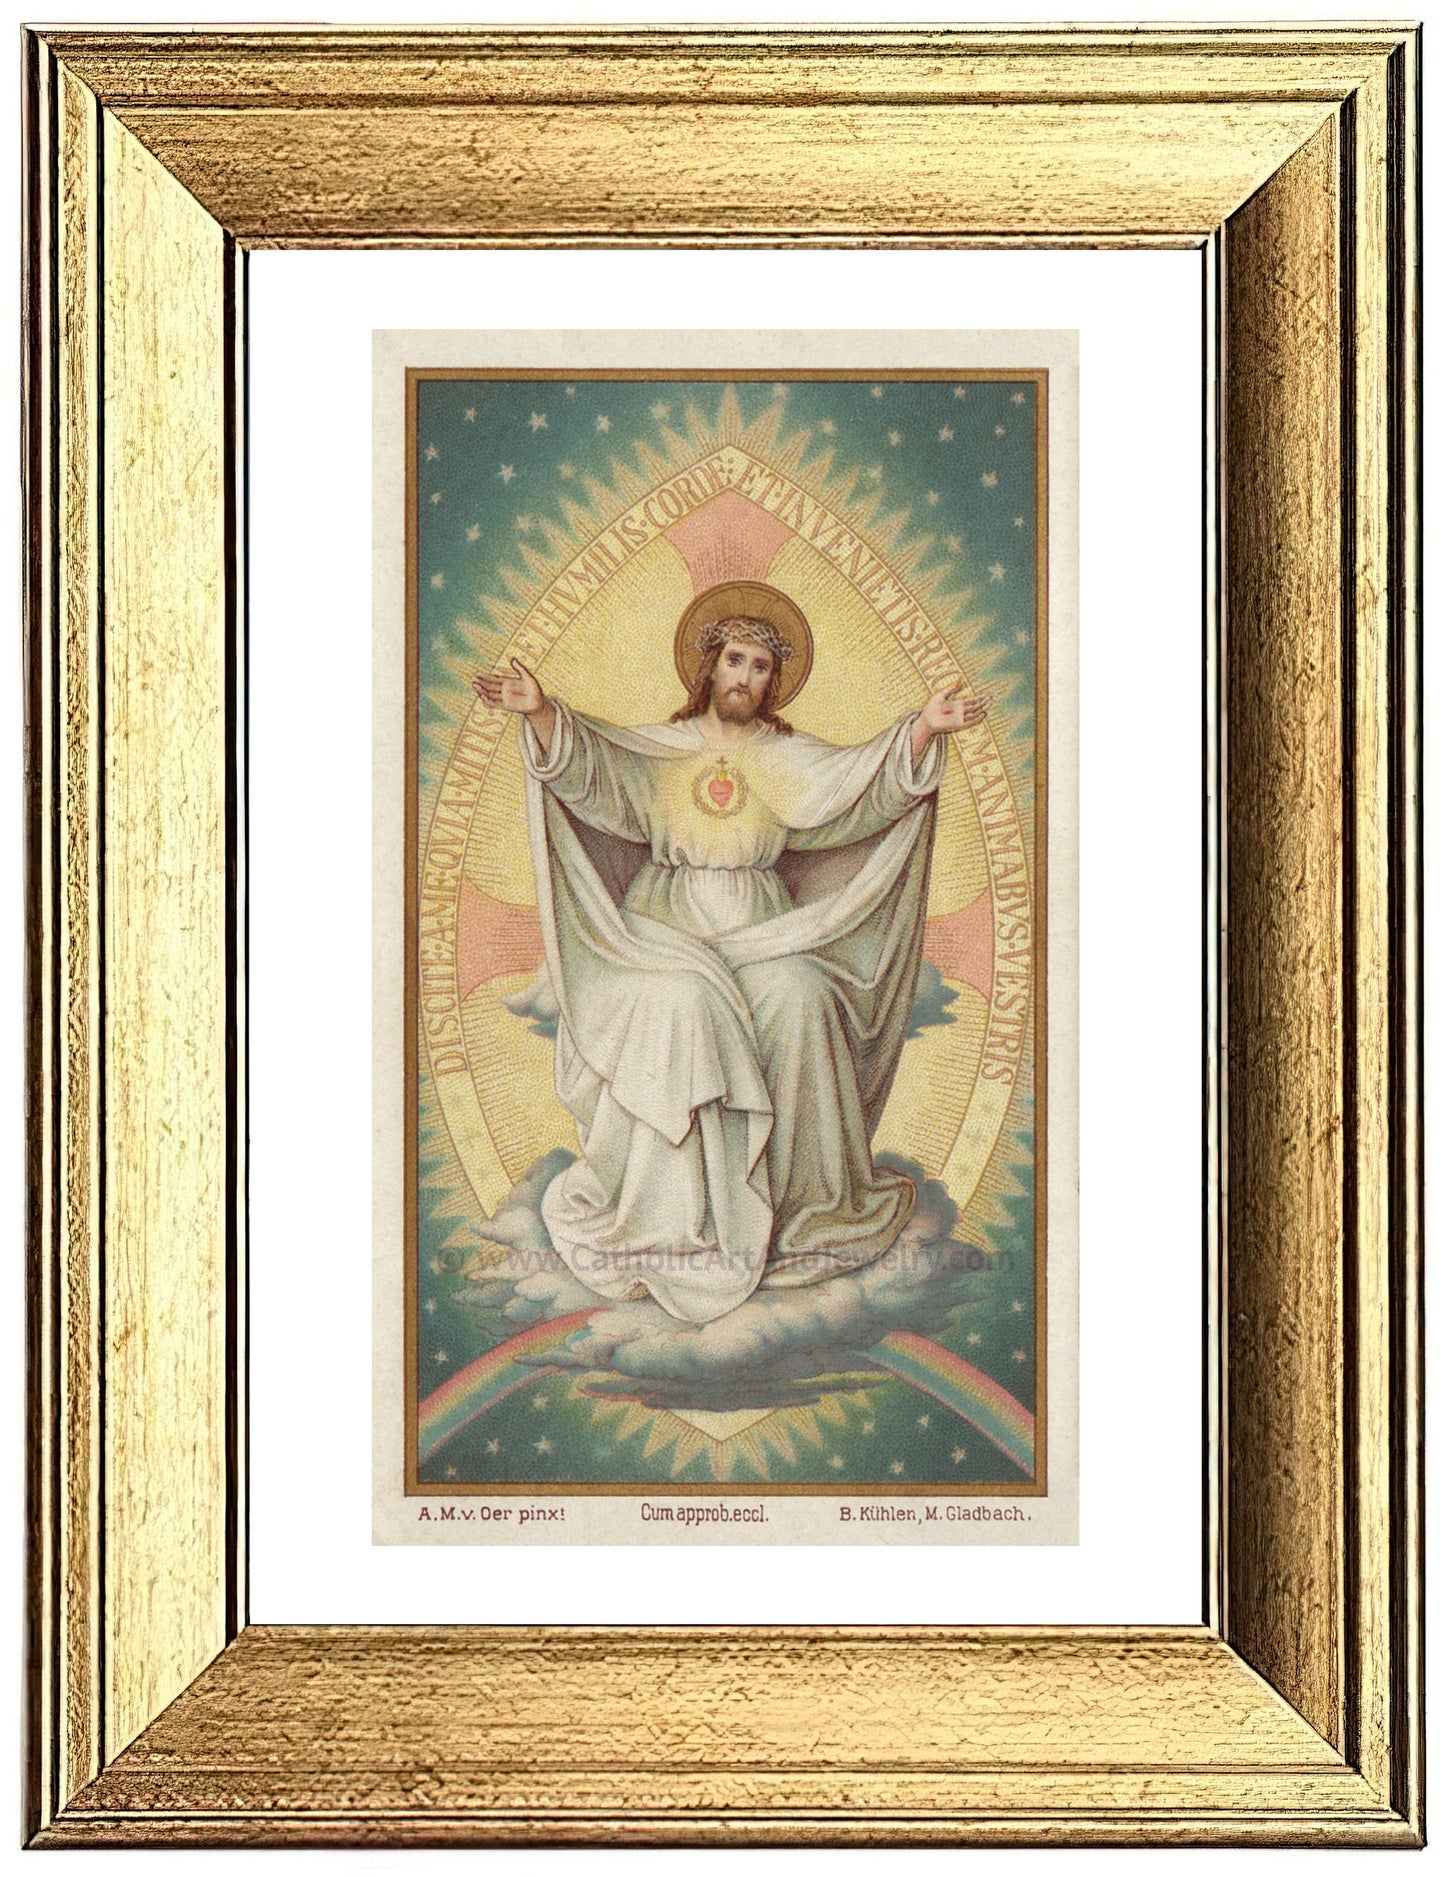 Come Unto Me – Jesus – based on a Vintage Holy Card – Christian Gift/Easter Gift – Christian Art Print – Archival Quality